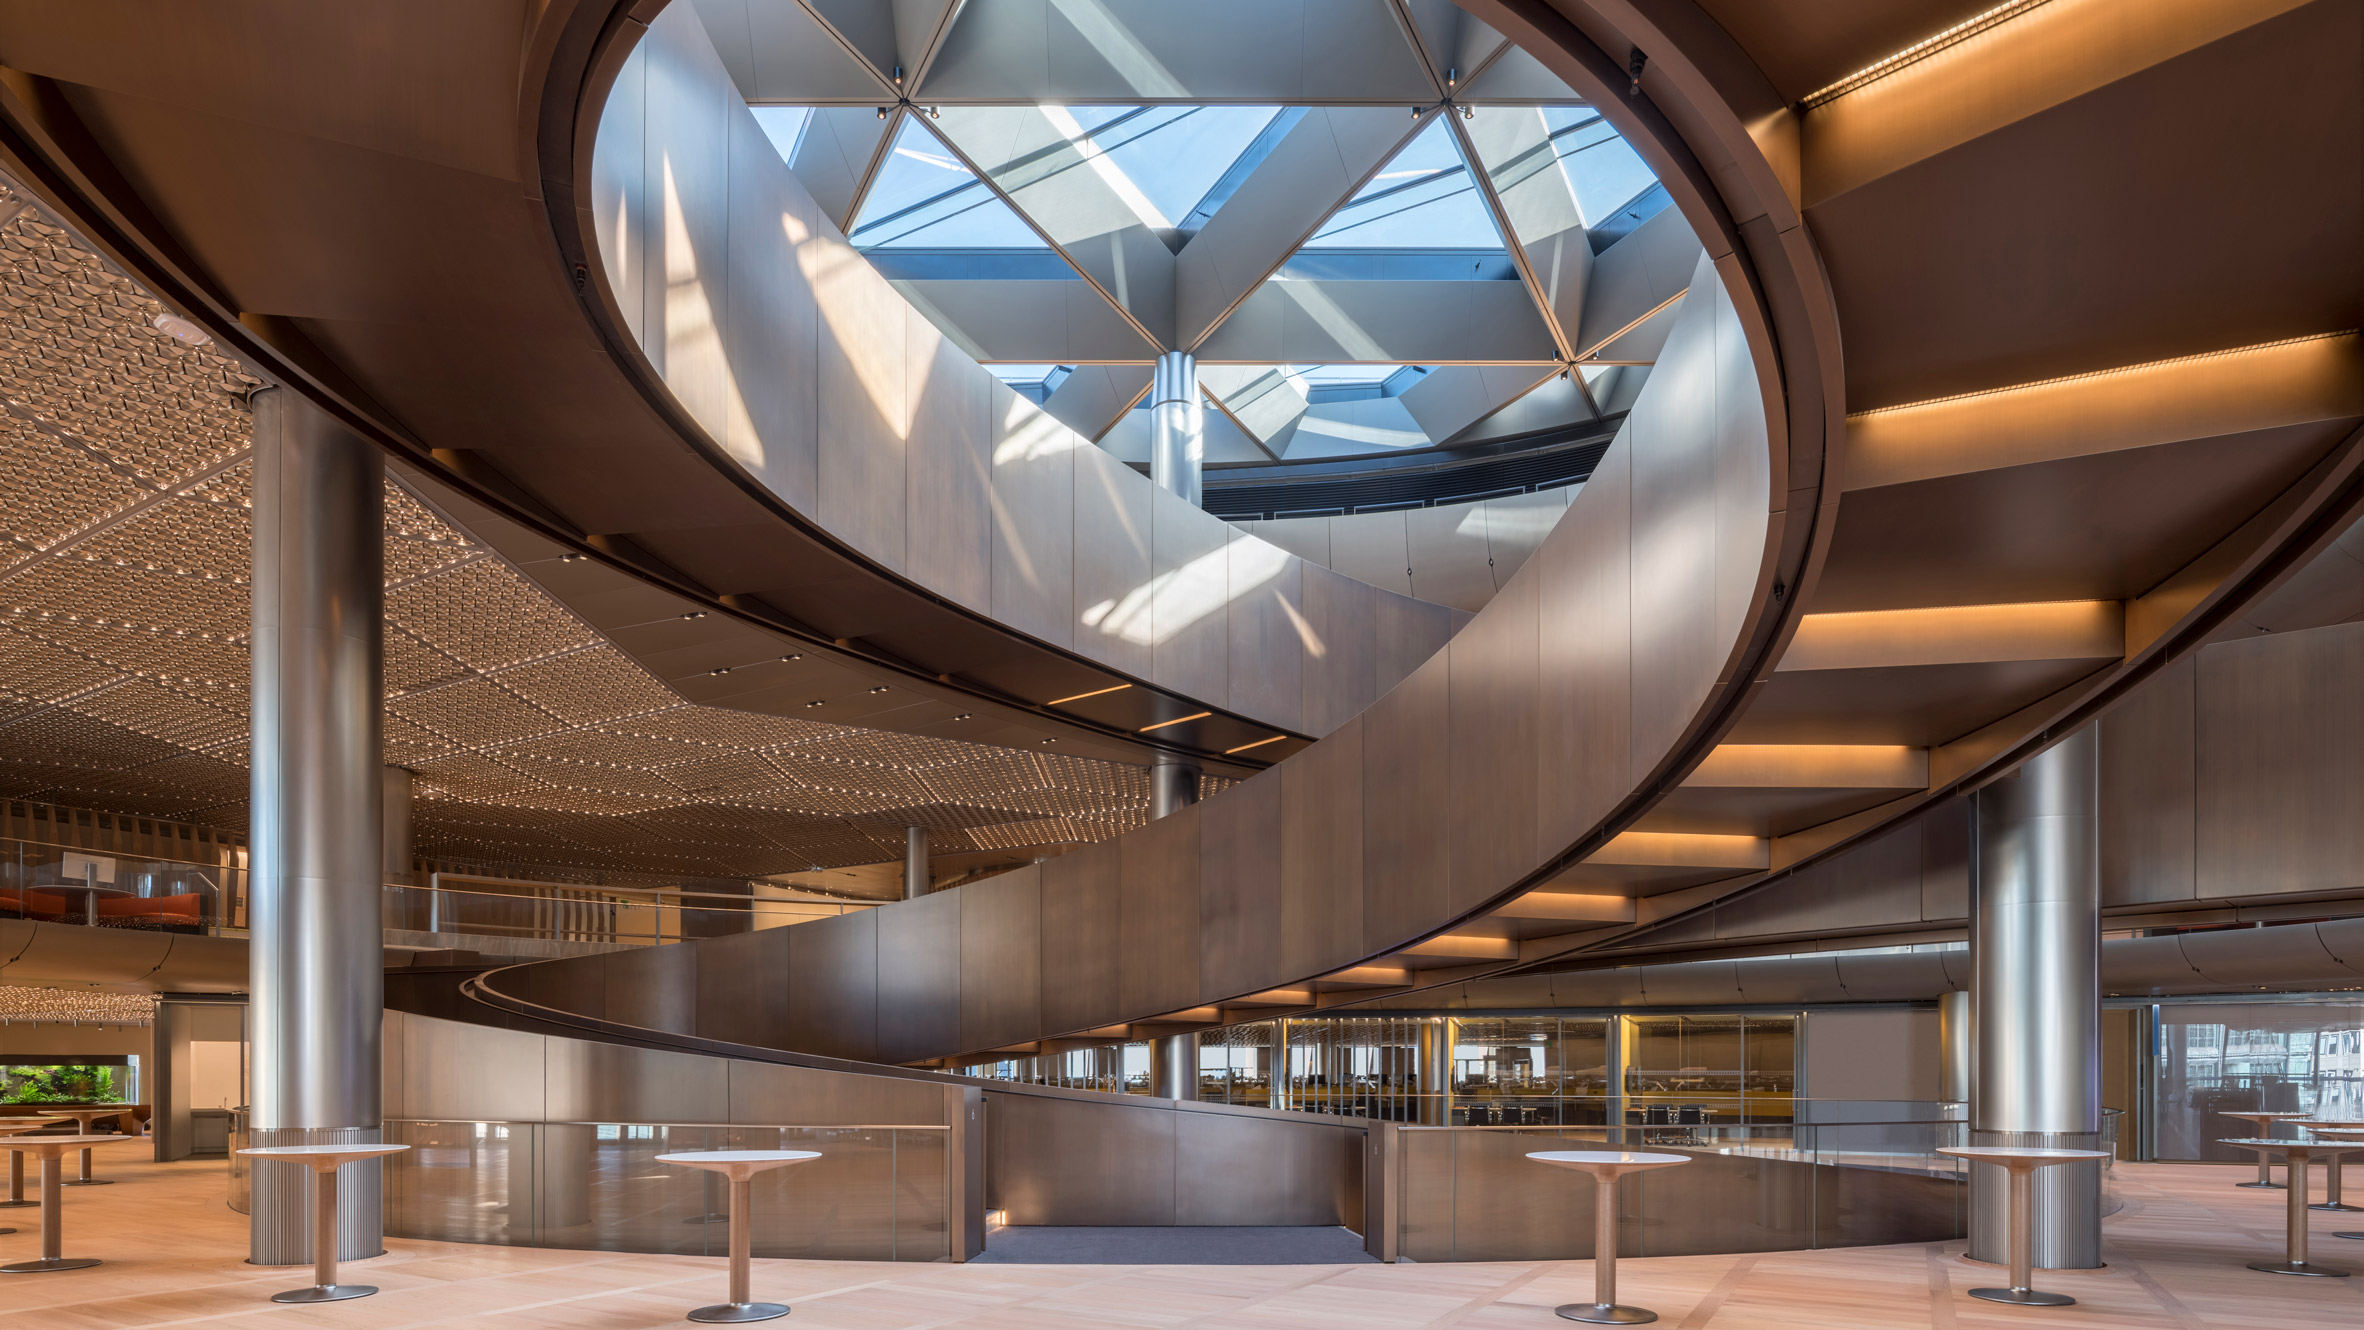 Fosters + Partners' Bloomberg HQ is a 